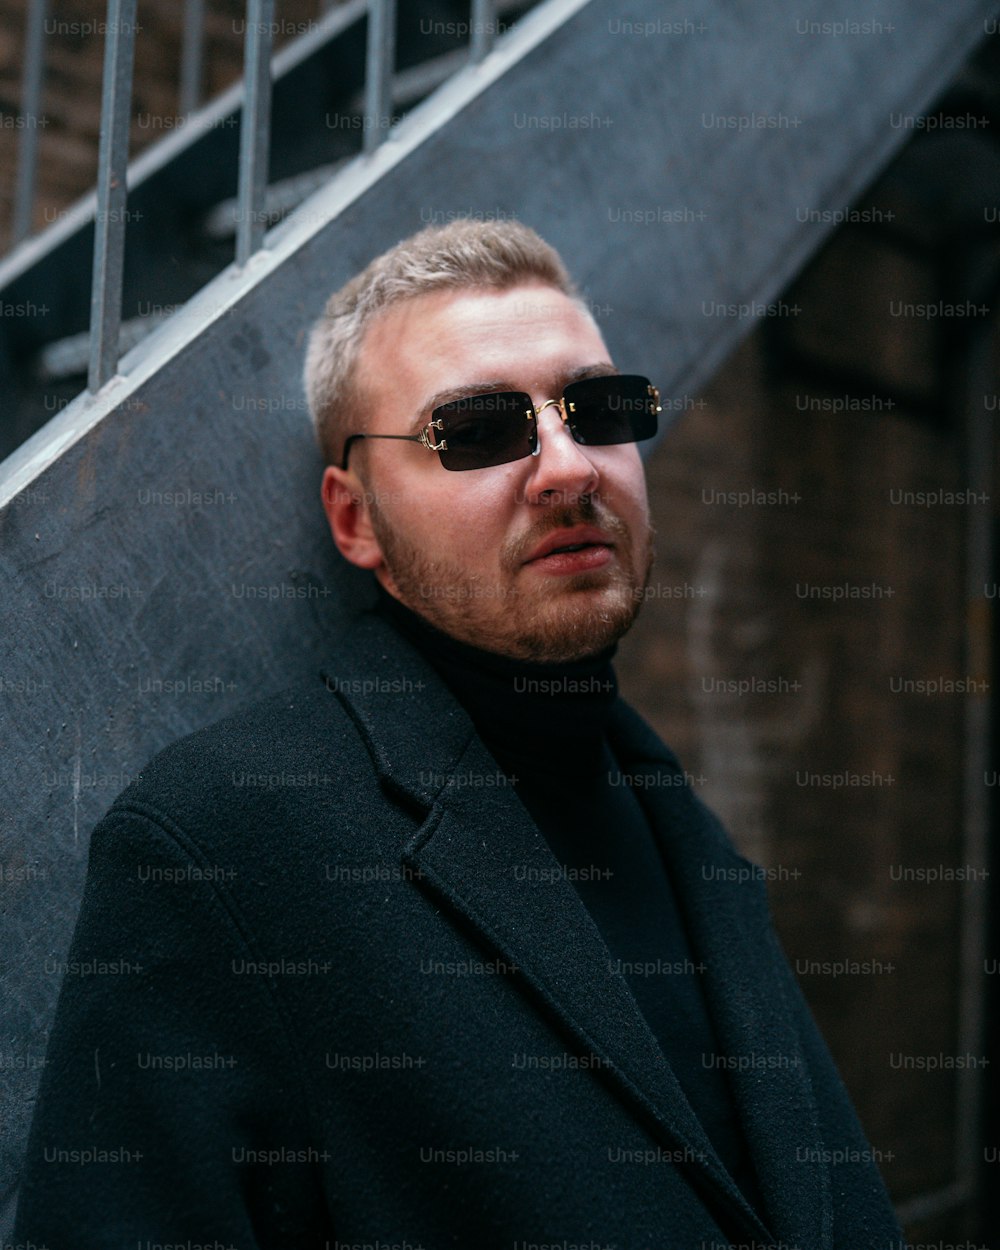 a man wearing sunglasses standing in front of a stair case